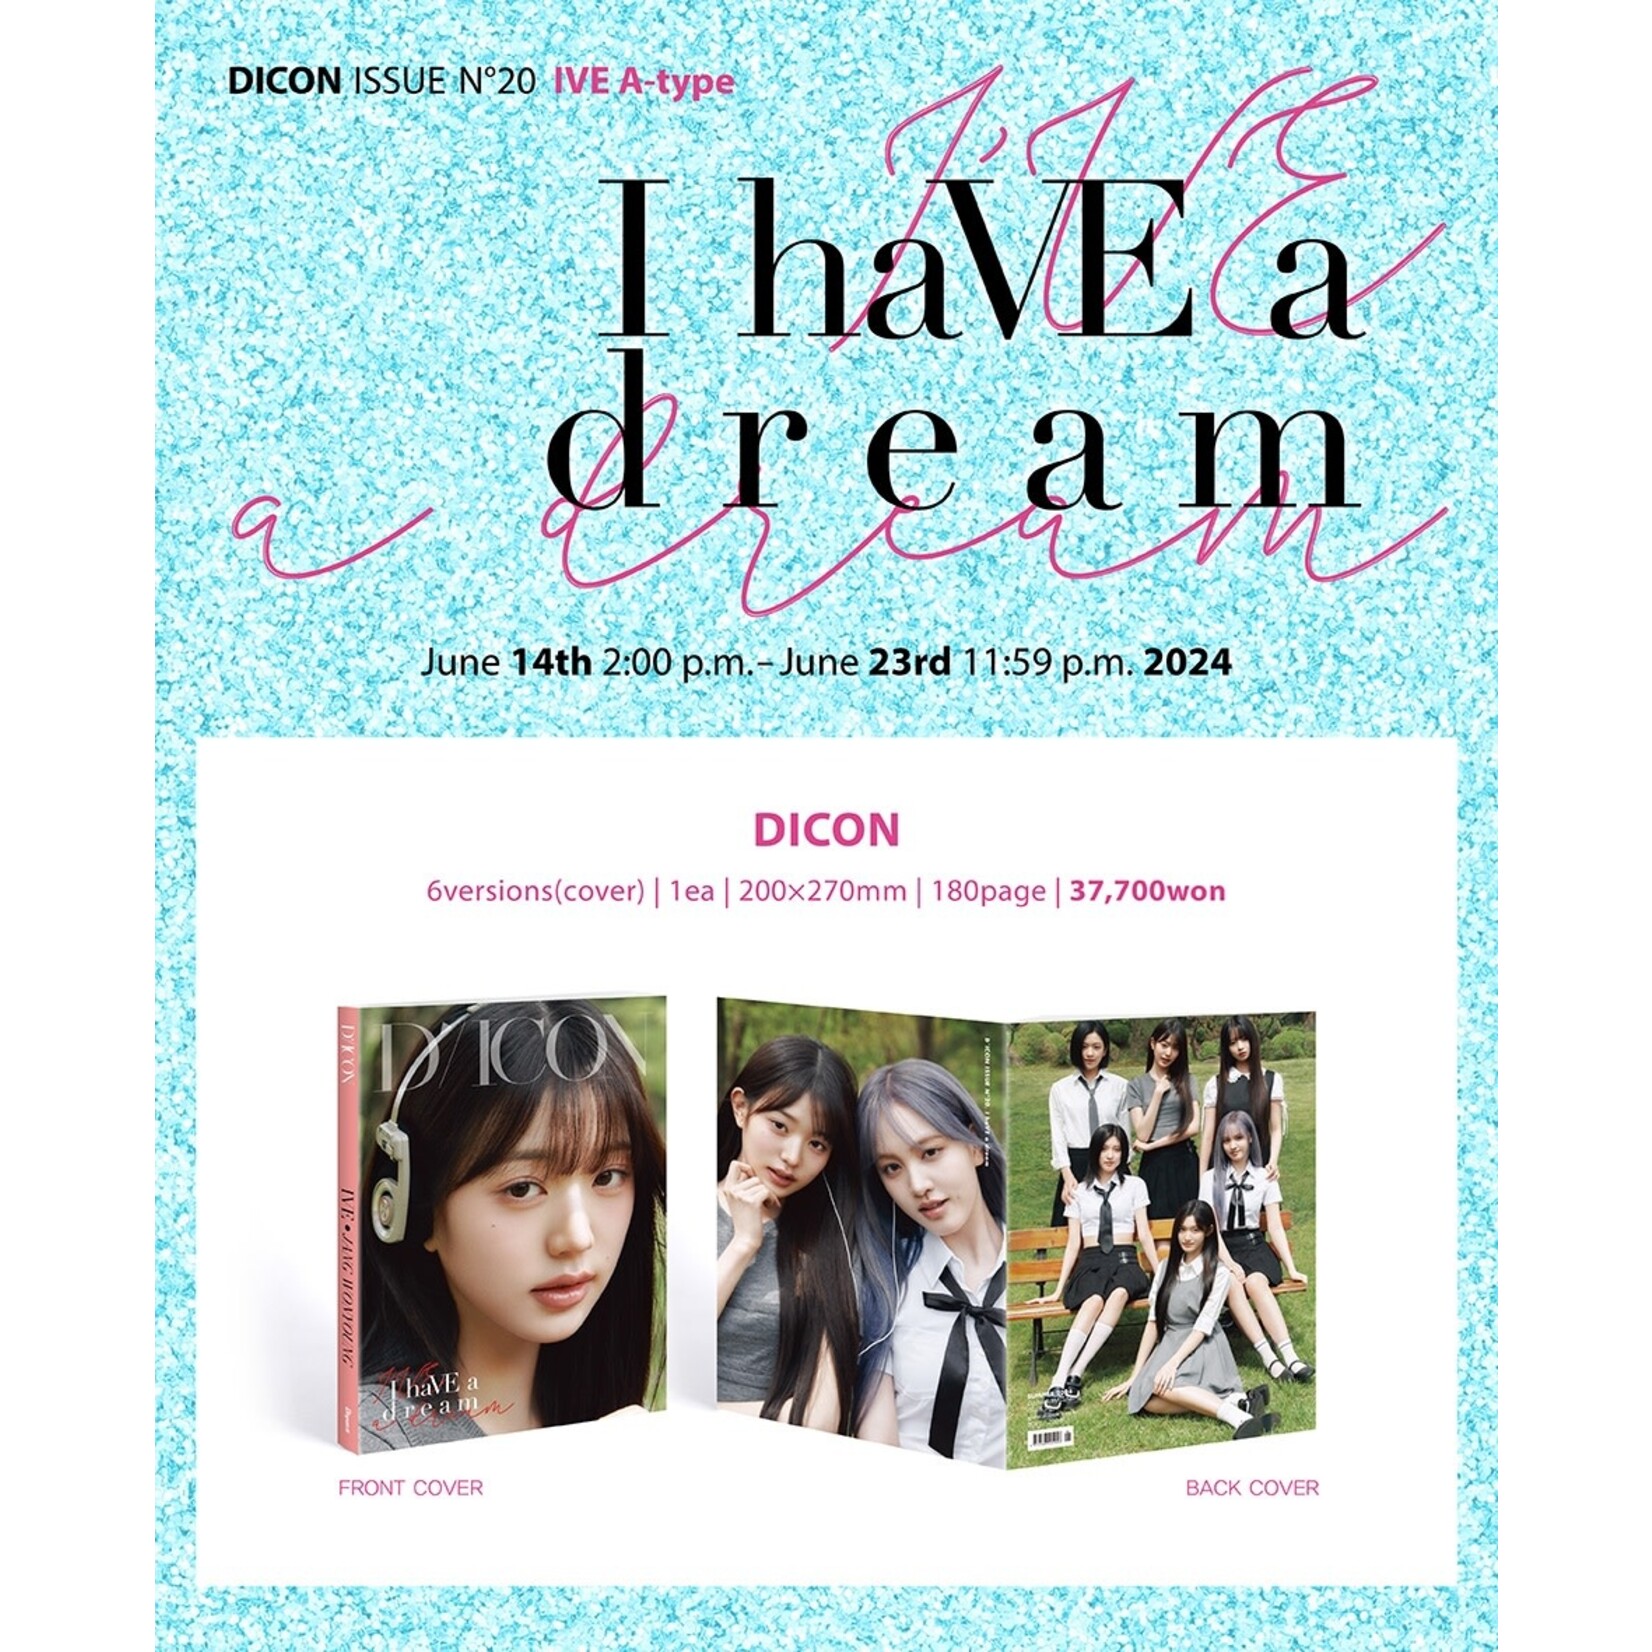 Ive IVE - DICON VOLUME N°20 IVE : I haVE a dream, I haVE a fantasy A ver